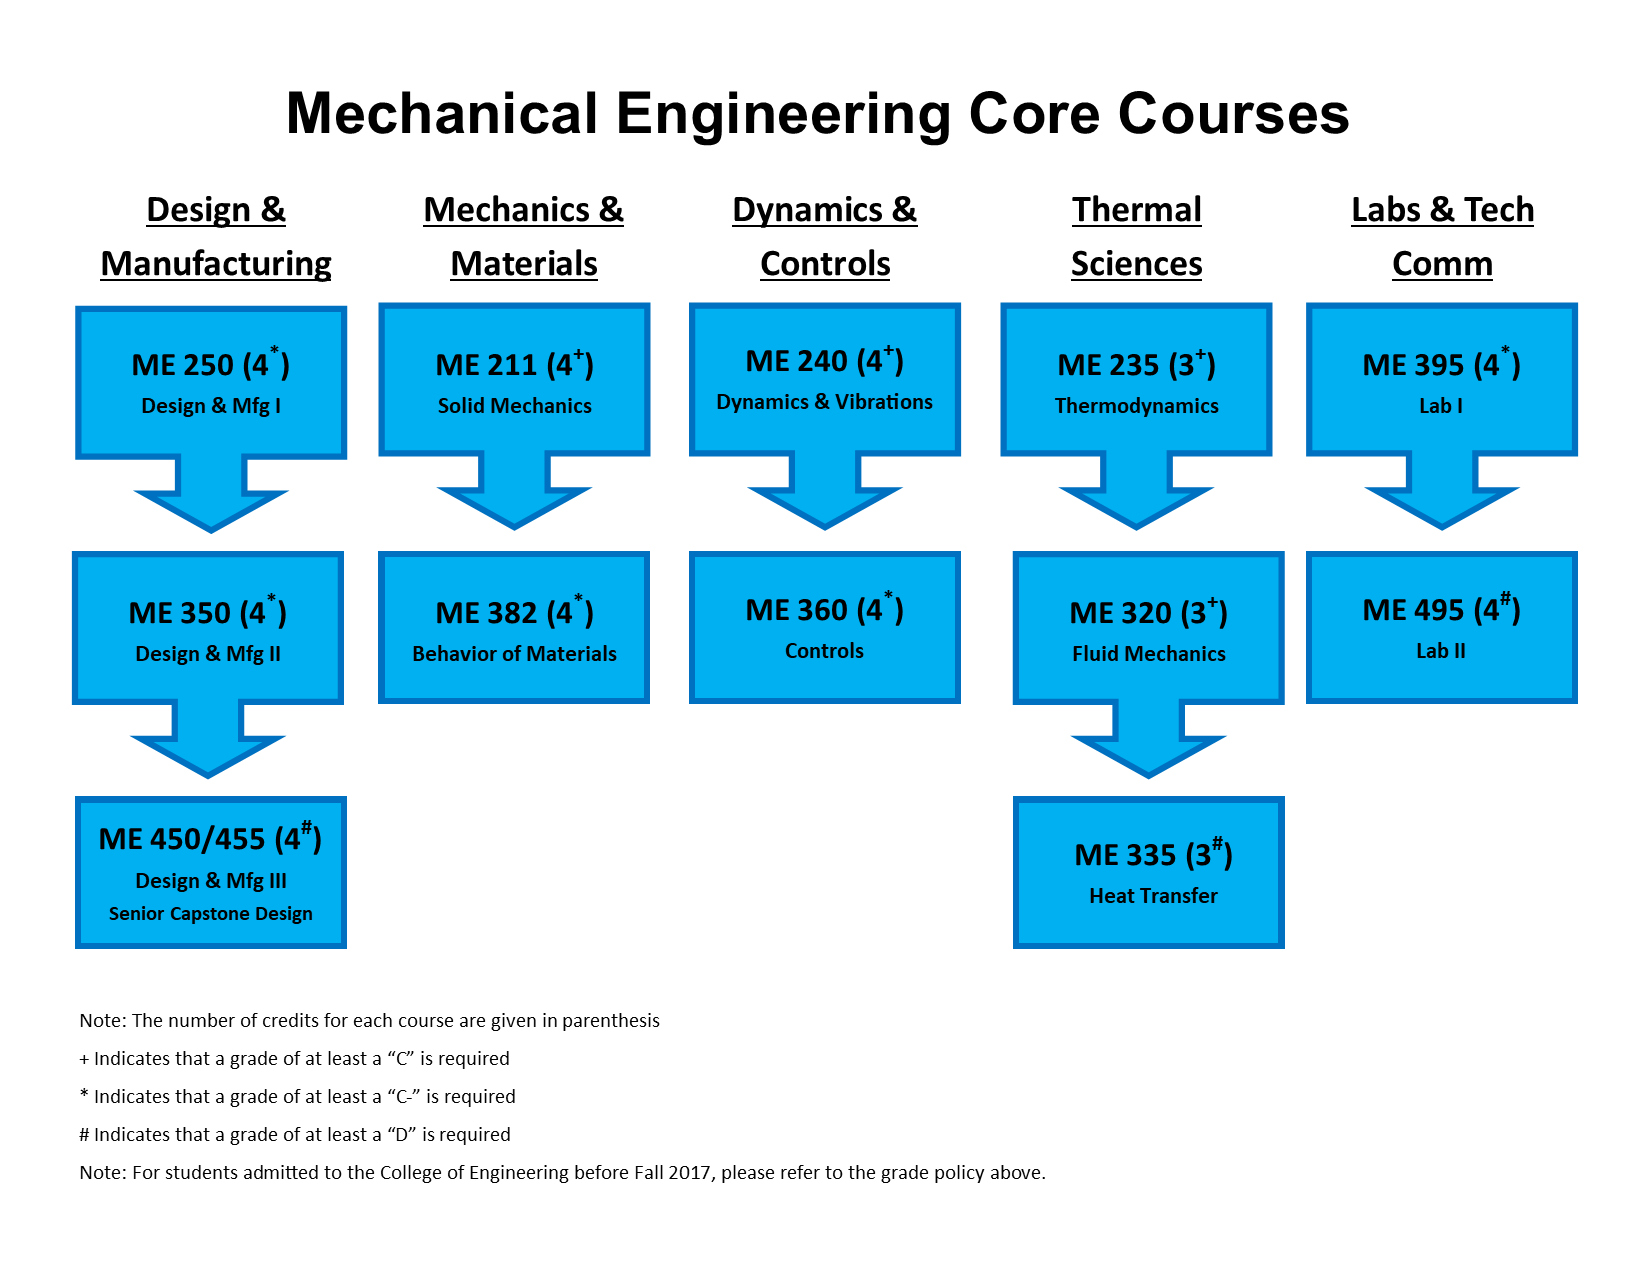 mit mechanical engineering phd requirements